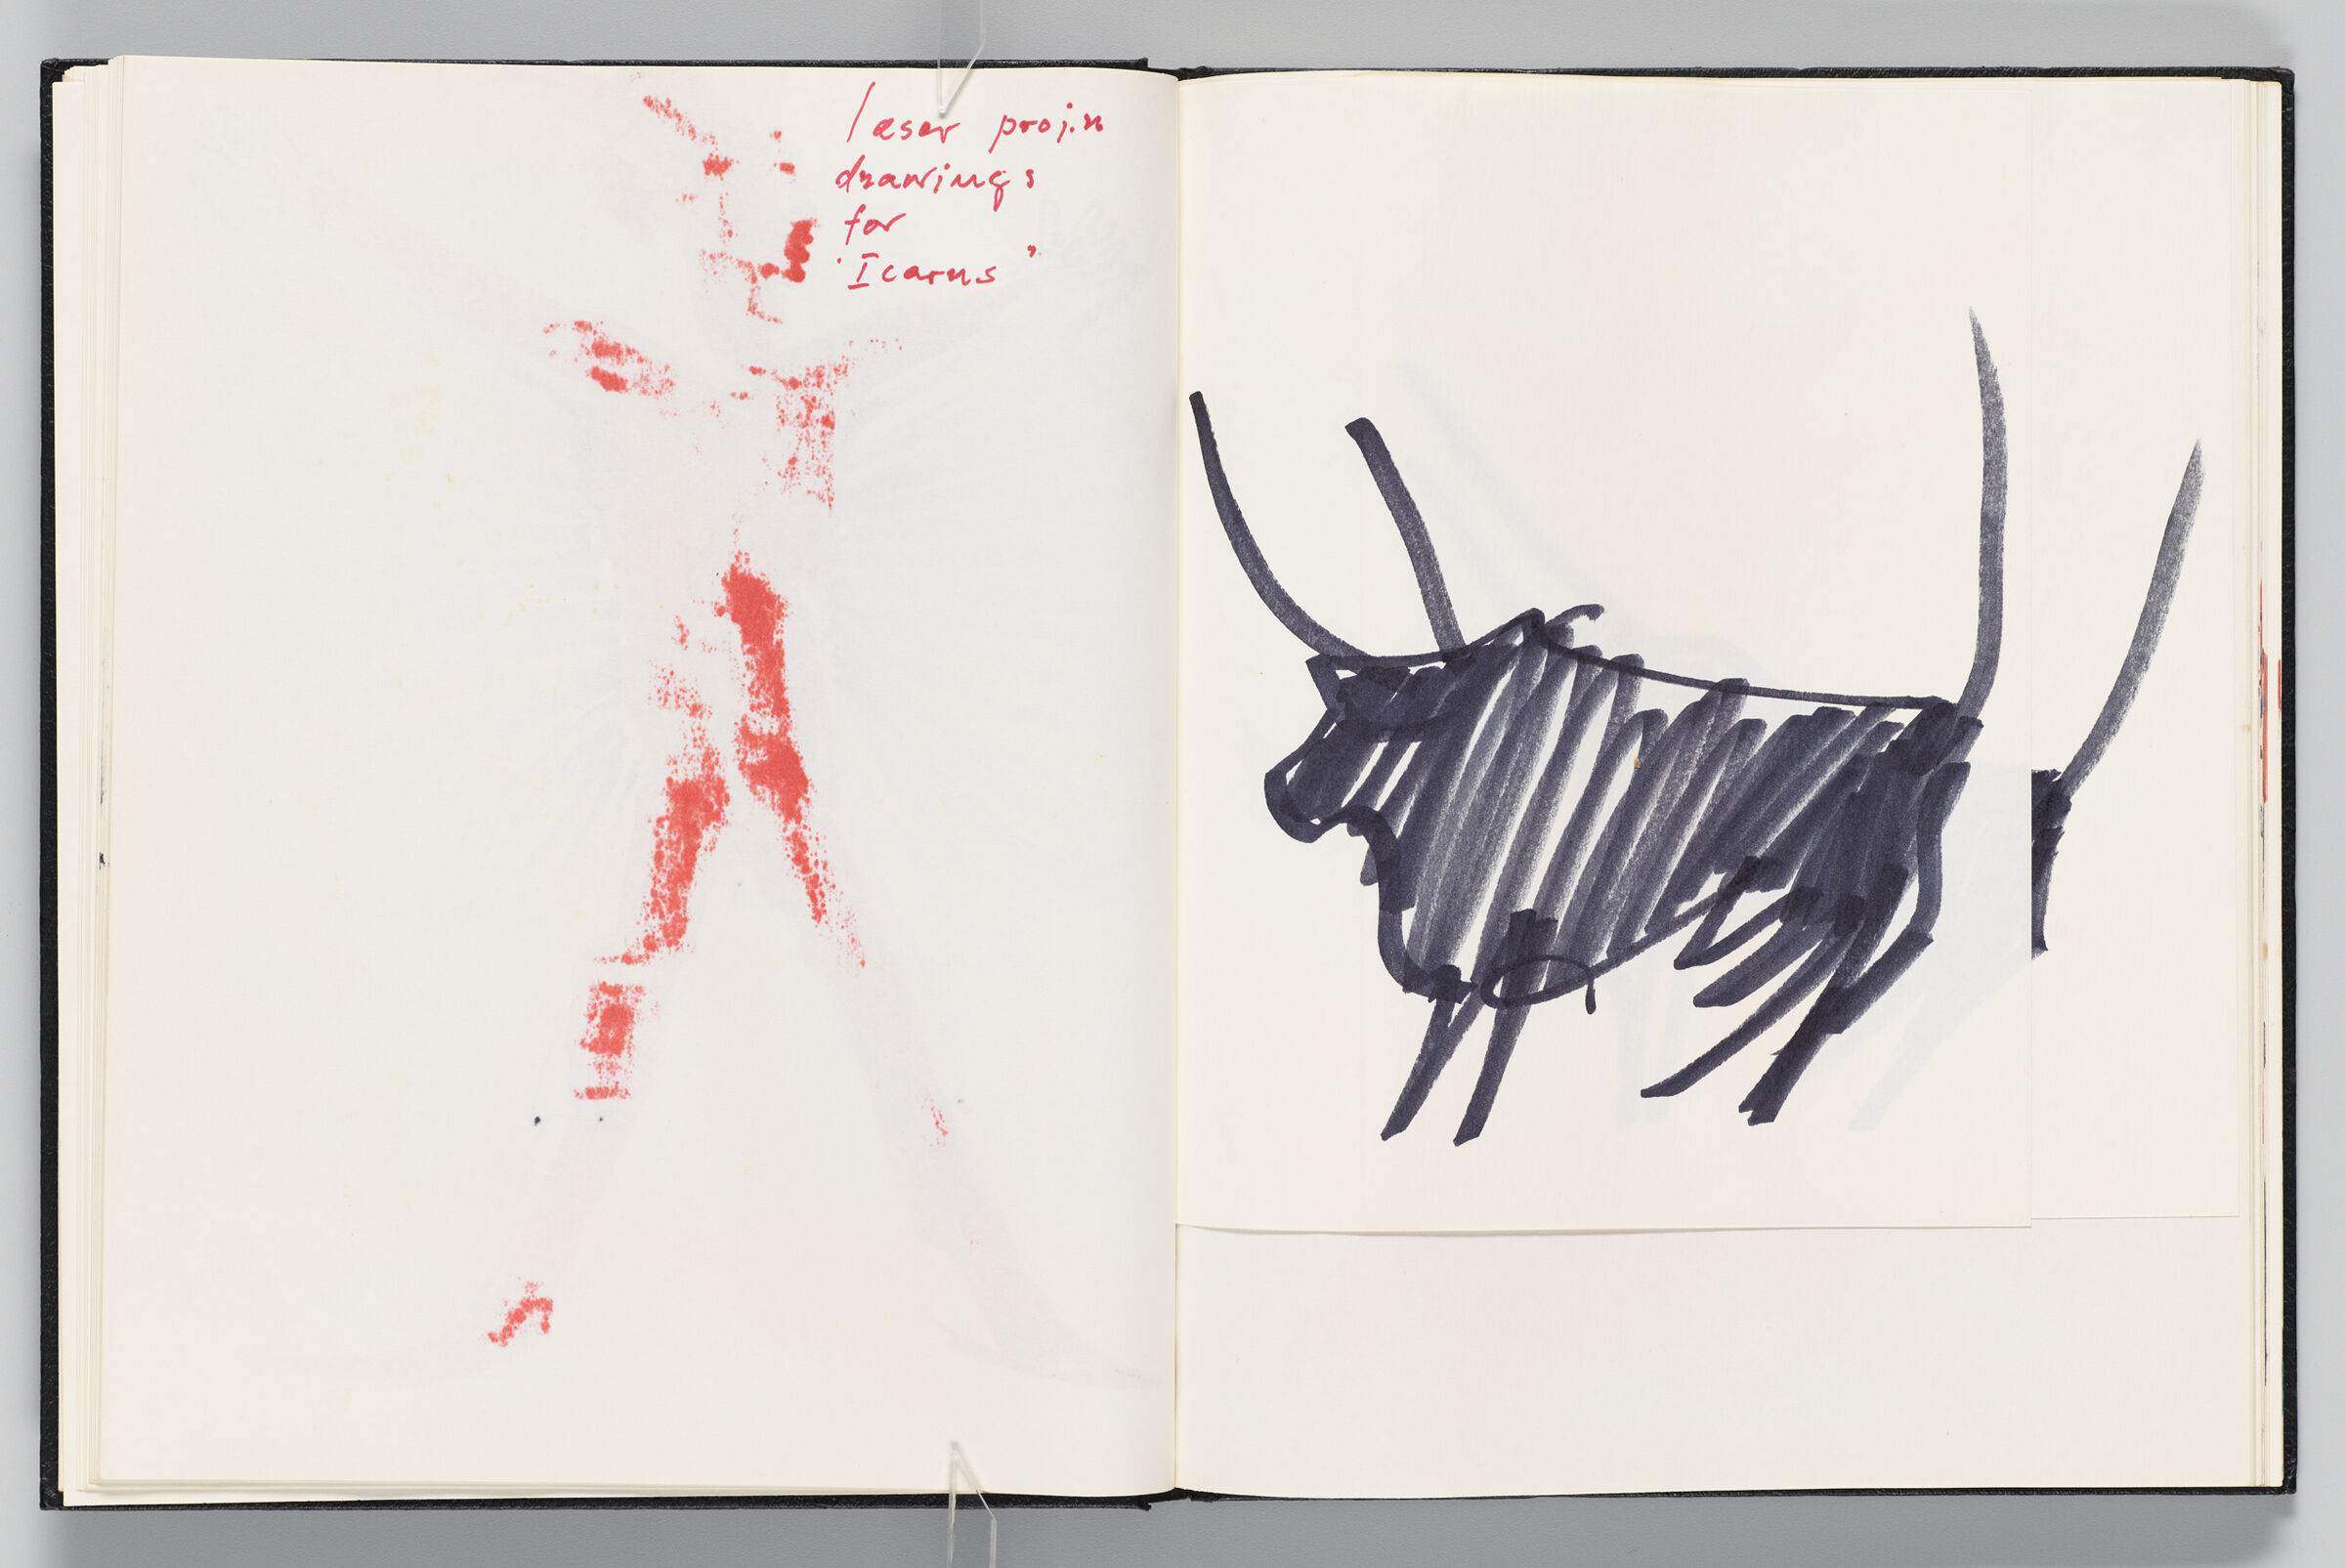 Untitled (Color Transfer And Notes, Left Page); Untitled (Adhered Minatour Sketches, Right Page)